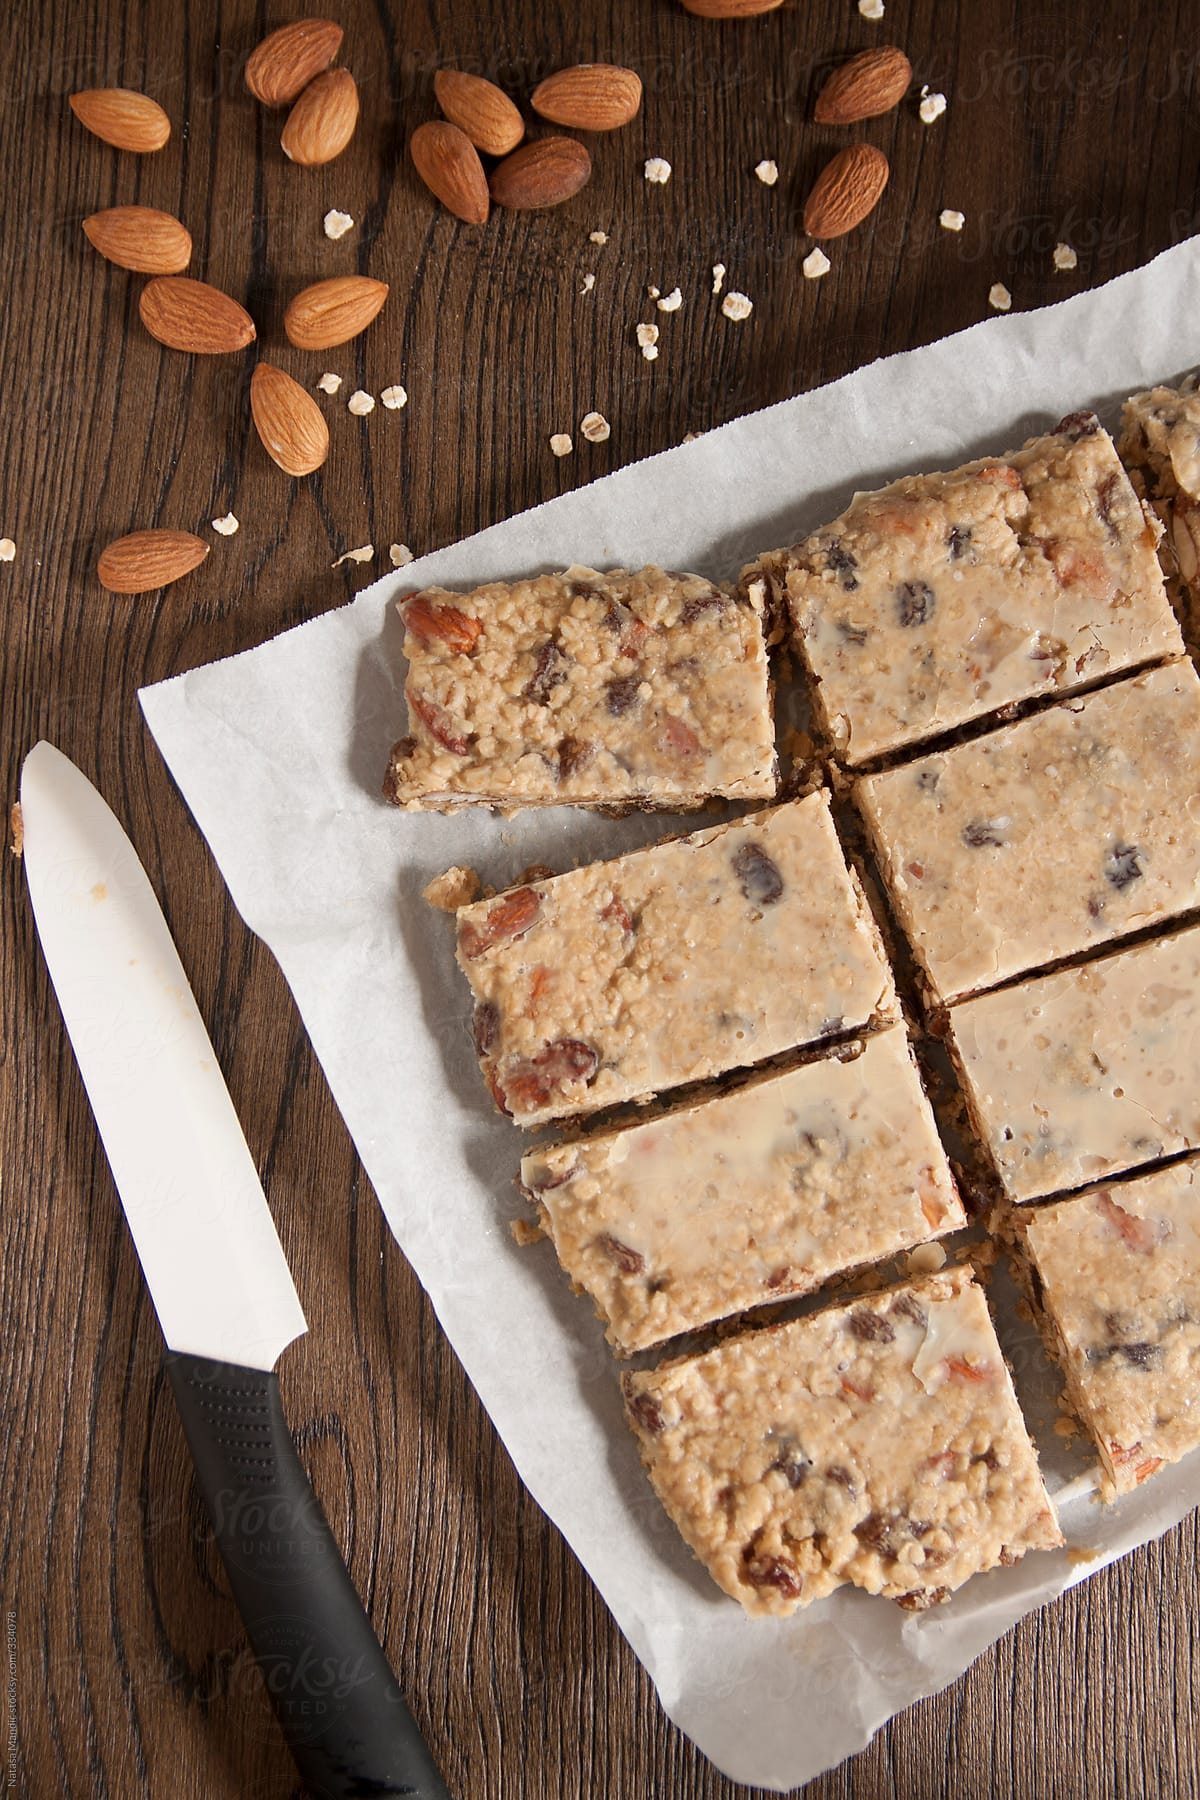 Oatmeal bars with almonds, raisin and peanut butter